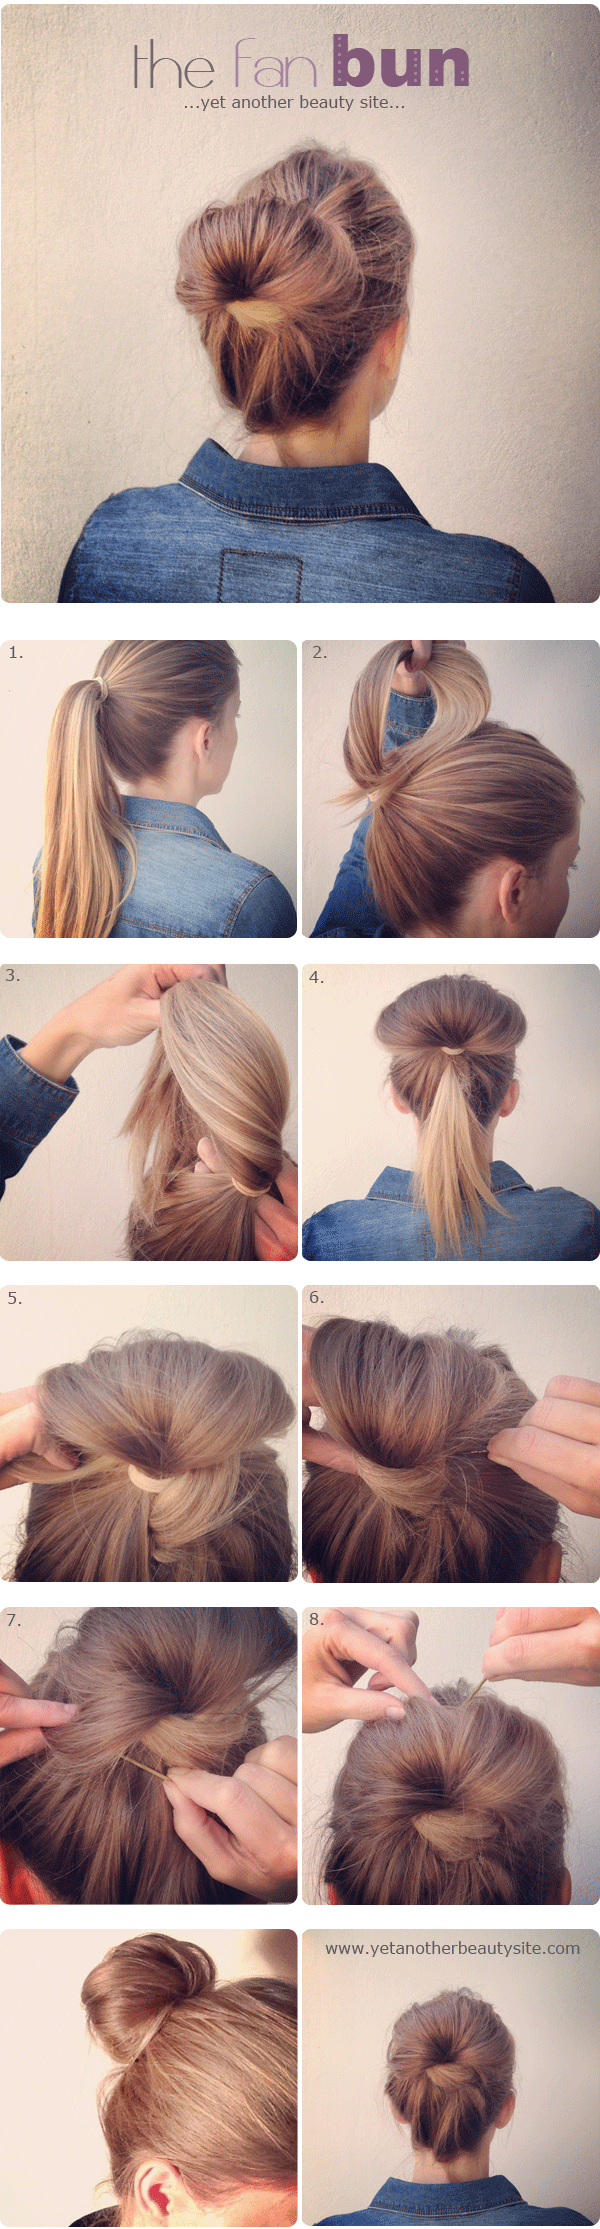 Yet another beauty site #hairtutorial #hair